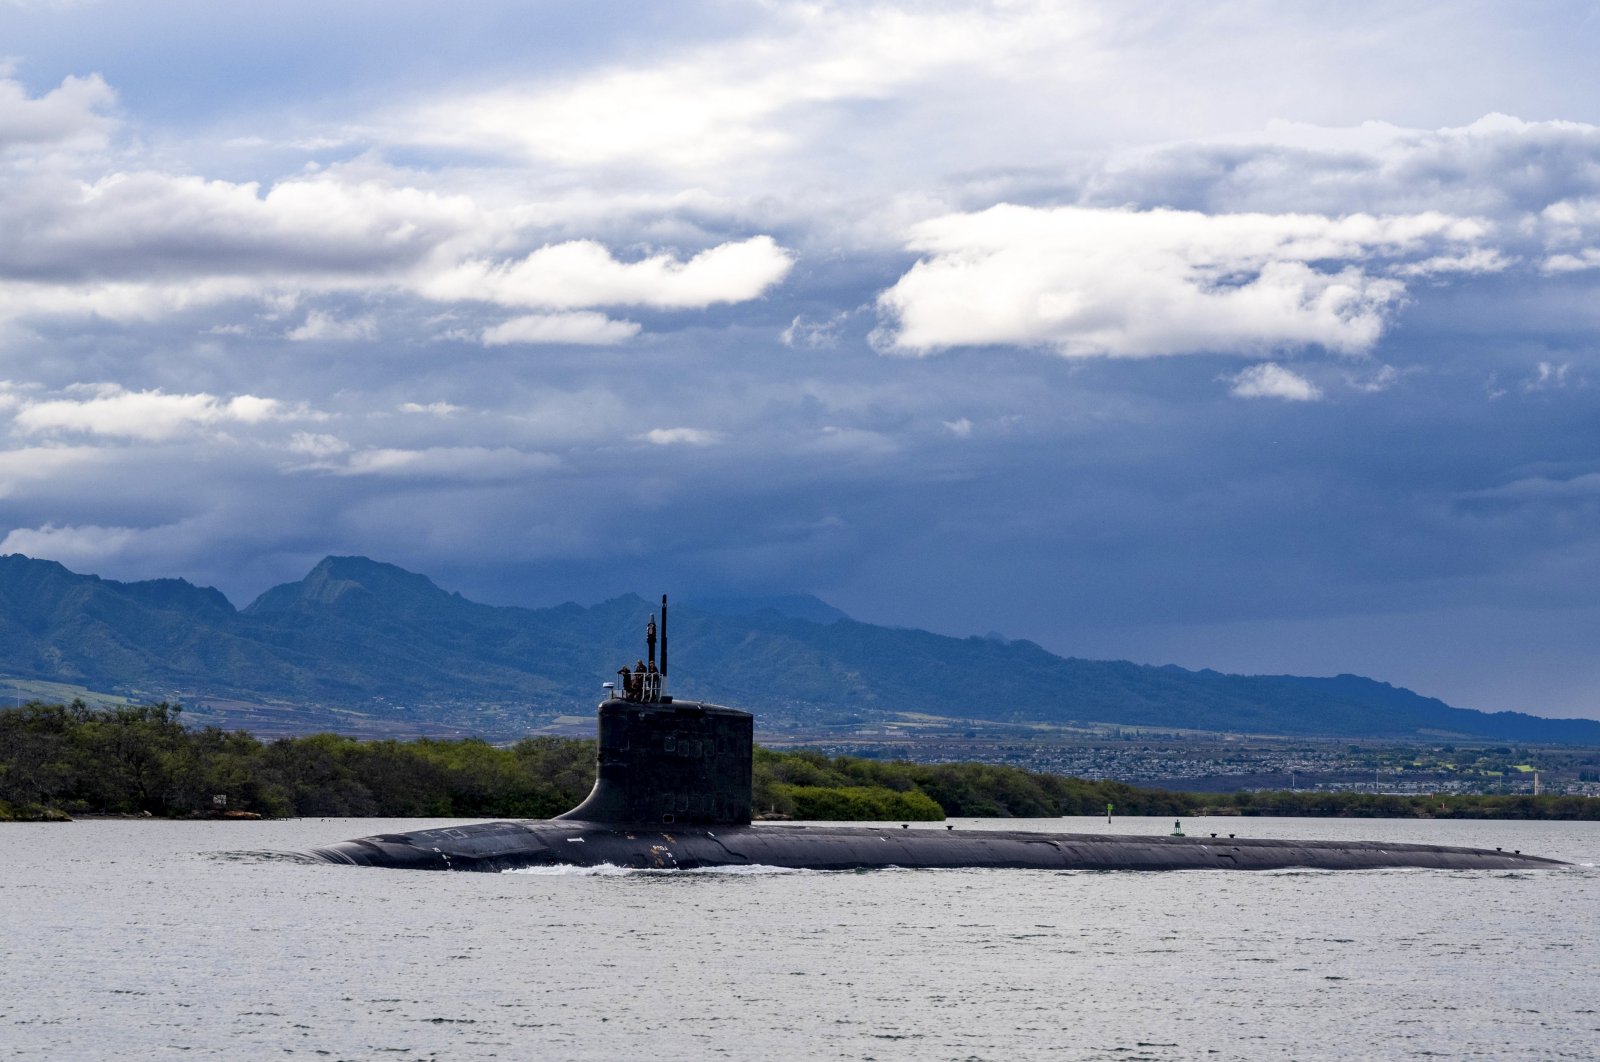 The Virginia-class fast-attack submarine USS Missouri (SSN 780) departs Joint Base Pearl Harbor-Hickam for a scheduled deployment in the 7th Fleet area of responsibility, Sept. 1, 2021. (Photo by U.S. Navy via AP)